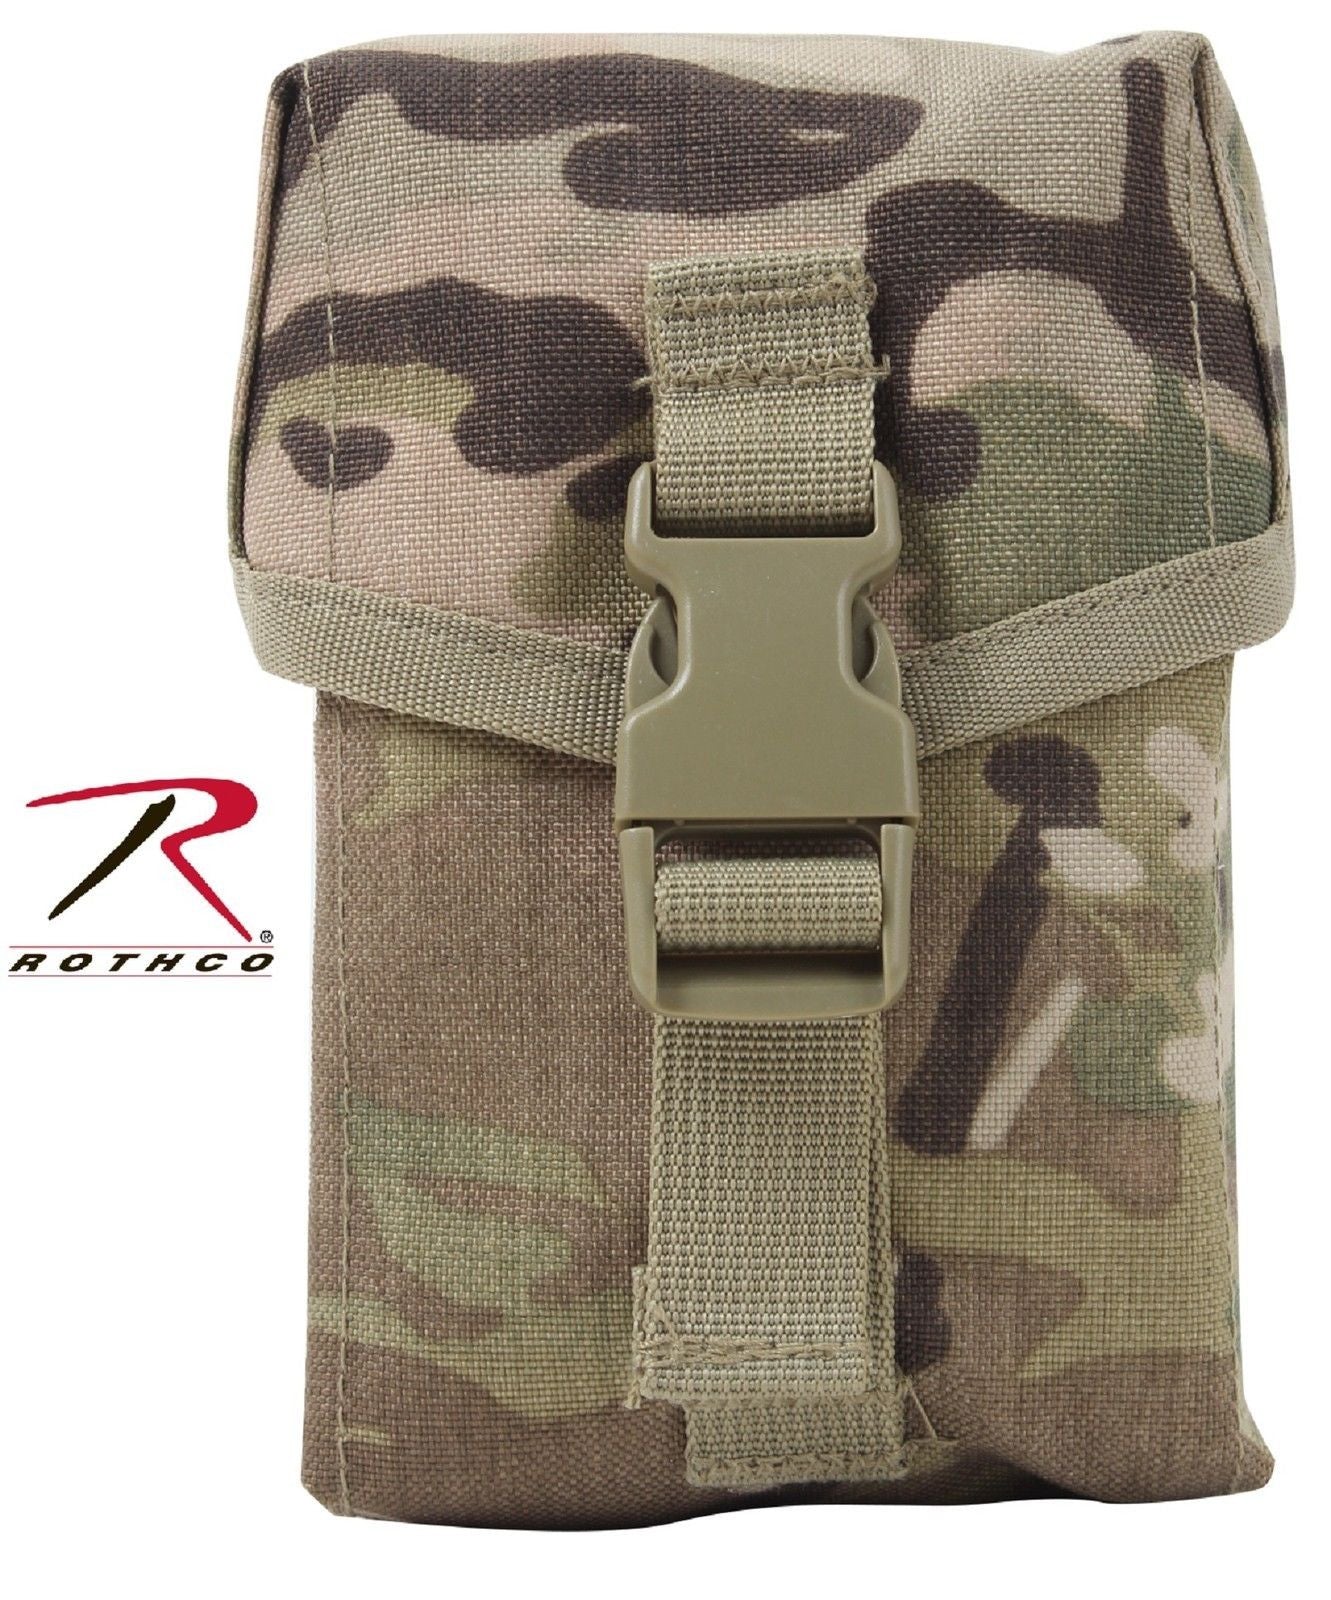 Rothco Coyote - Molle Compatible Compass Pouch, Brown